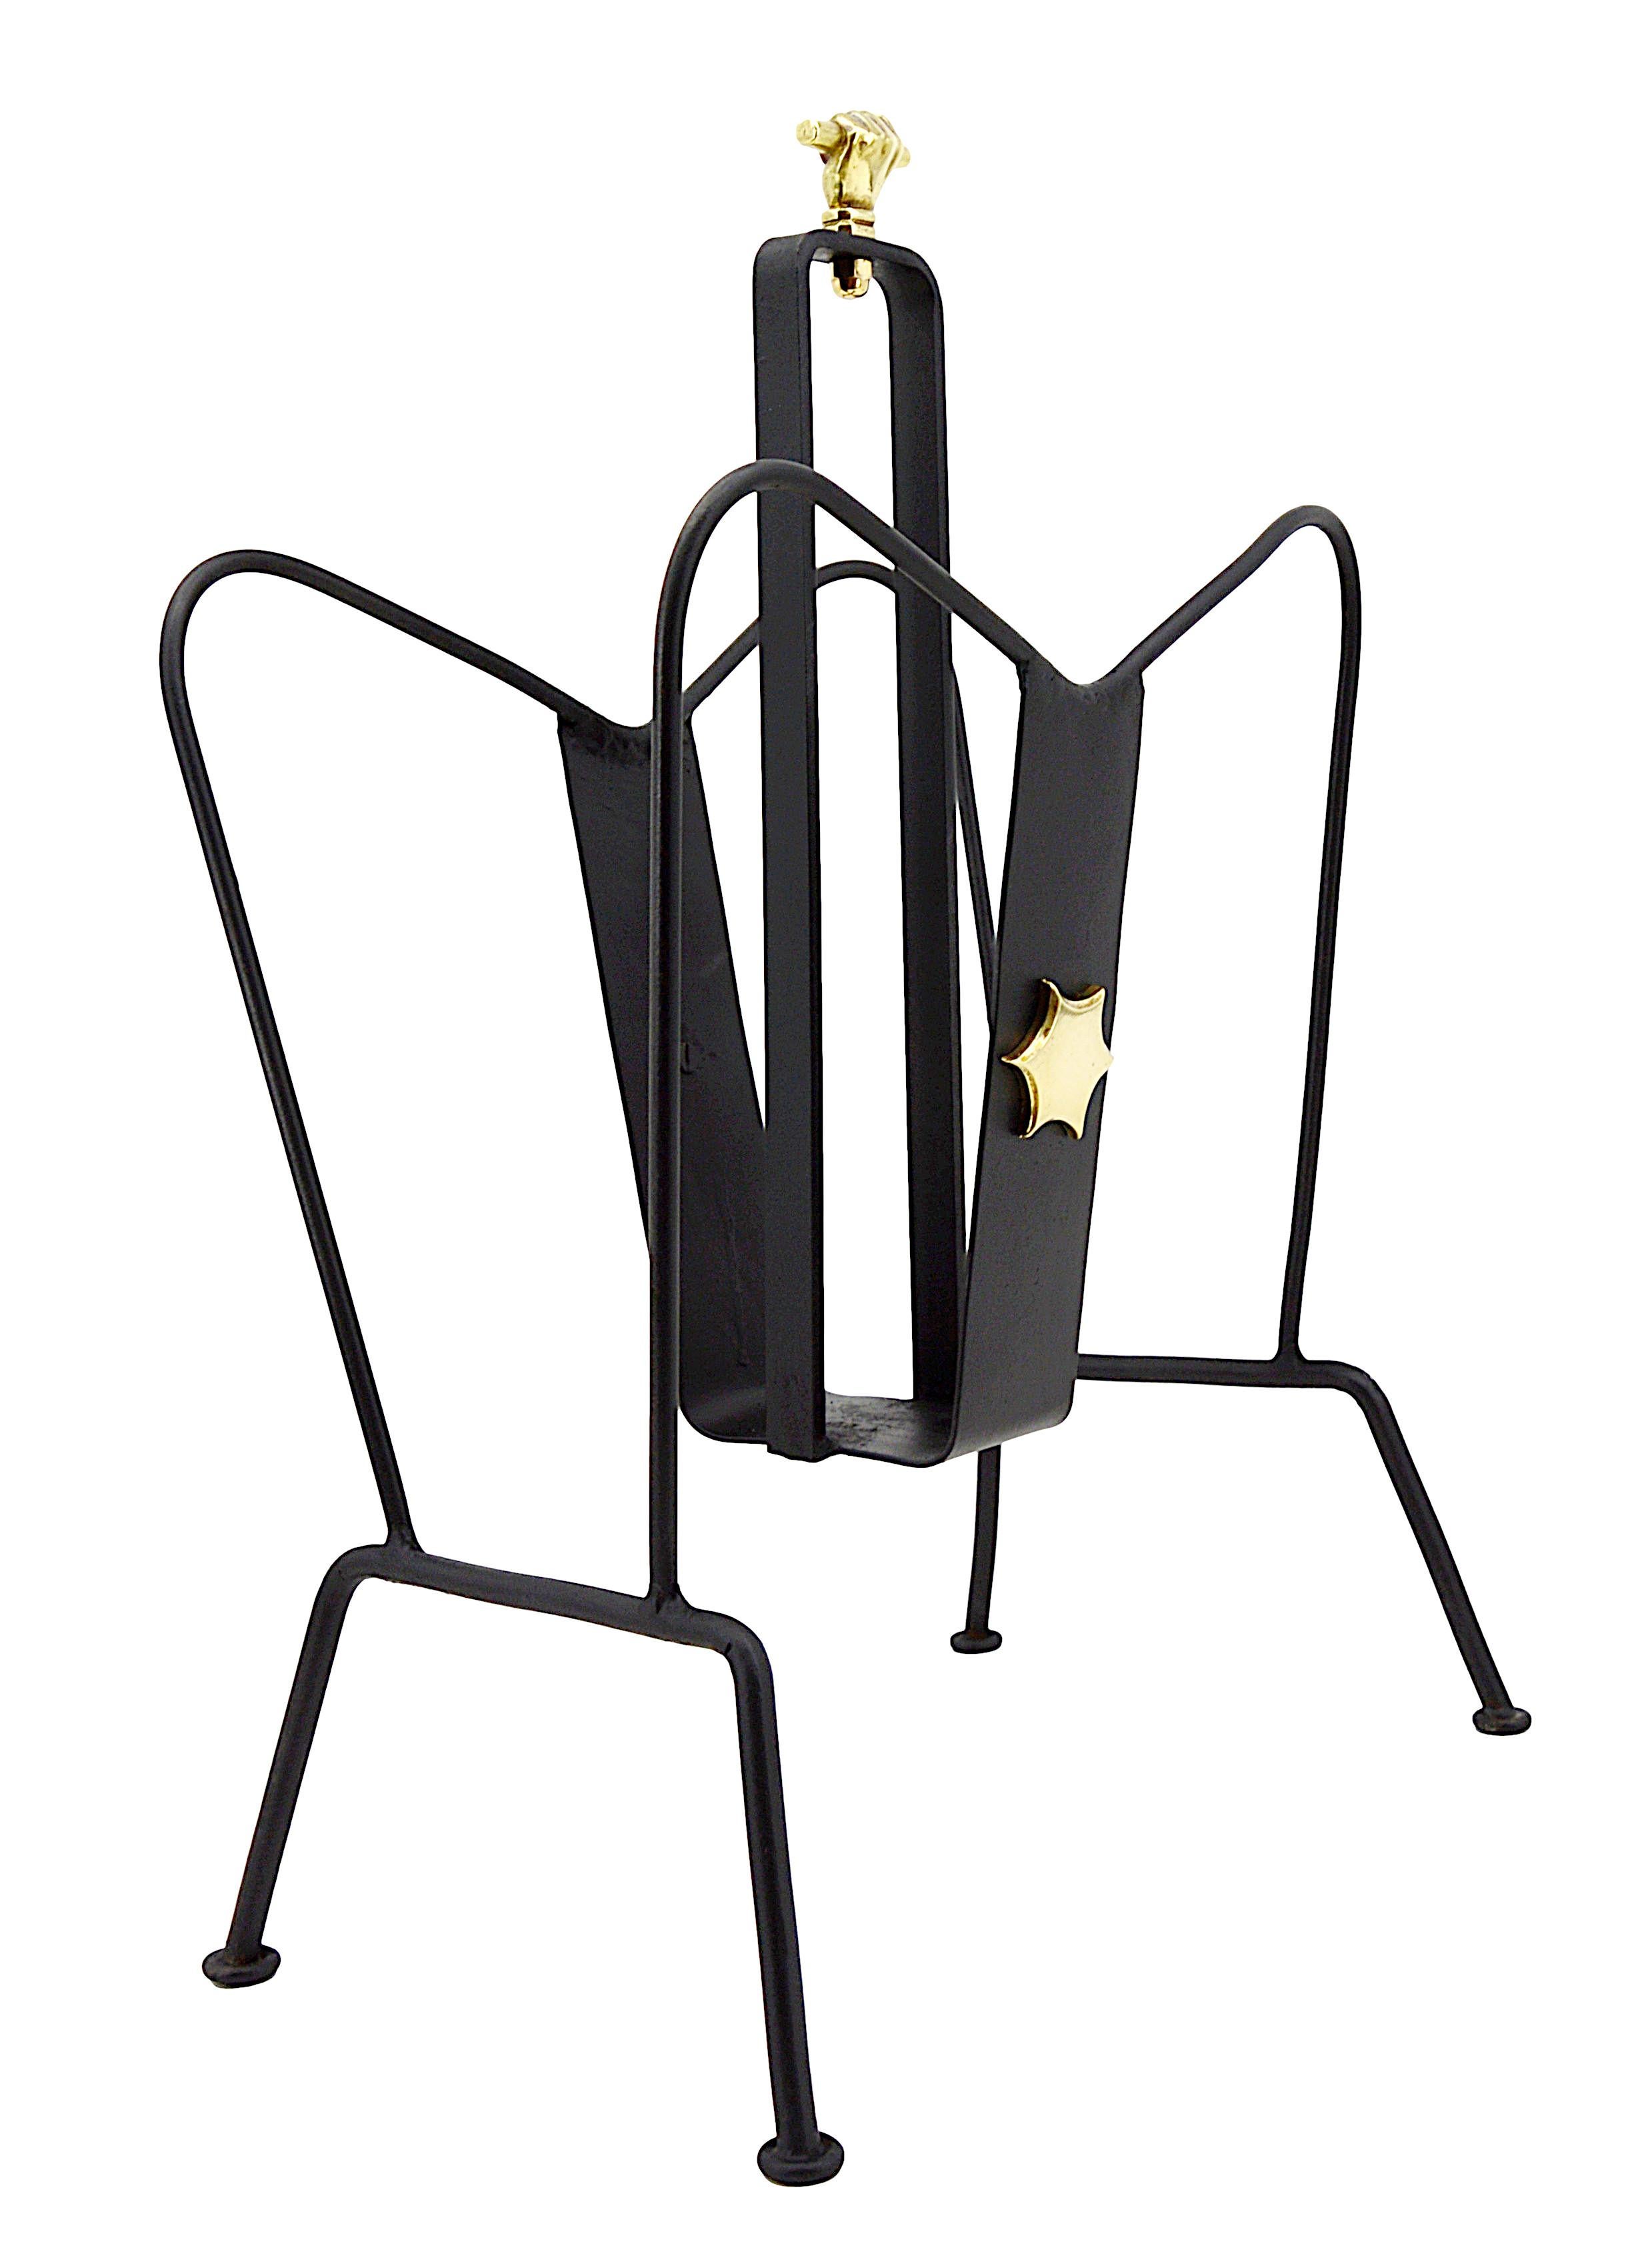 French mid-century magazine rack by Jacques Adnet for Perrier & Fils (Paris), France, 1950s. Magazine rack in wrought iron and gilded brass with two compartments and base with pastille base. Handle adorned with a gilt brass hand. Each side upright